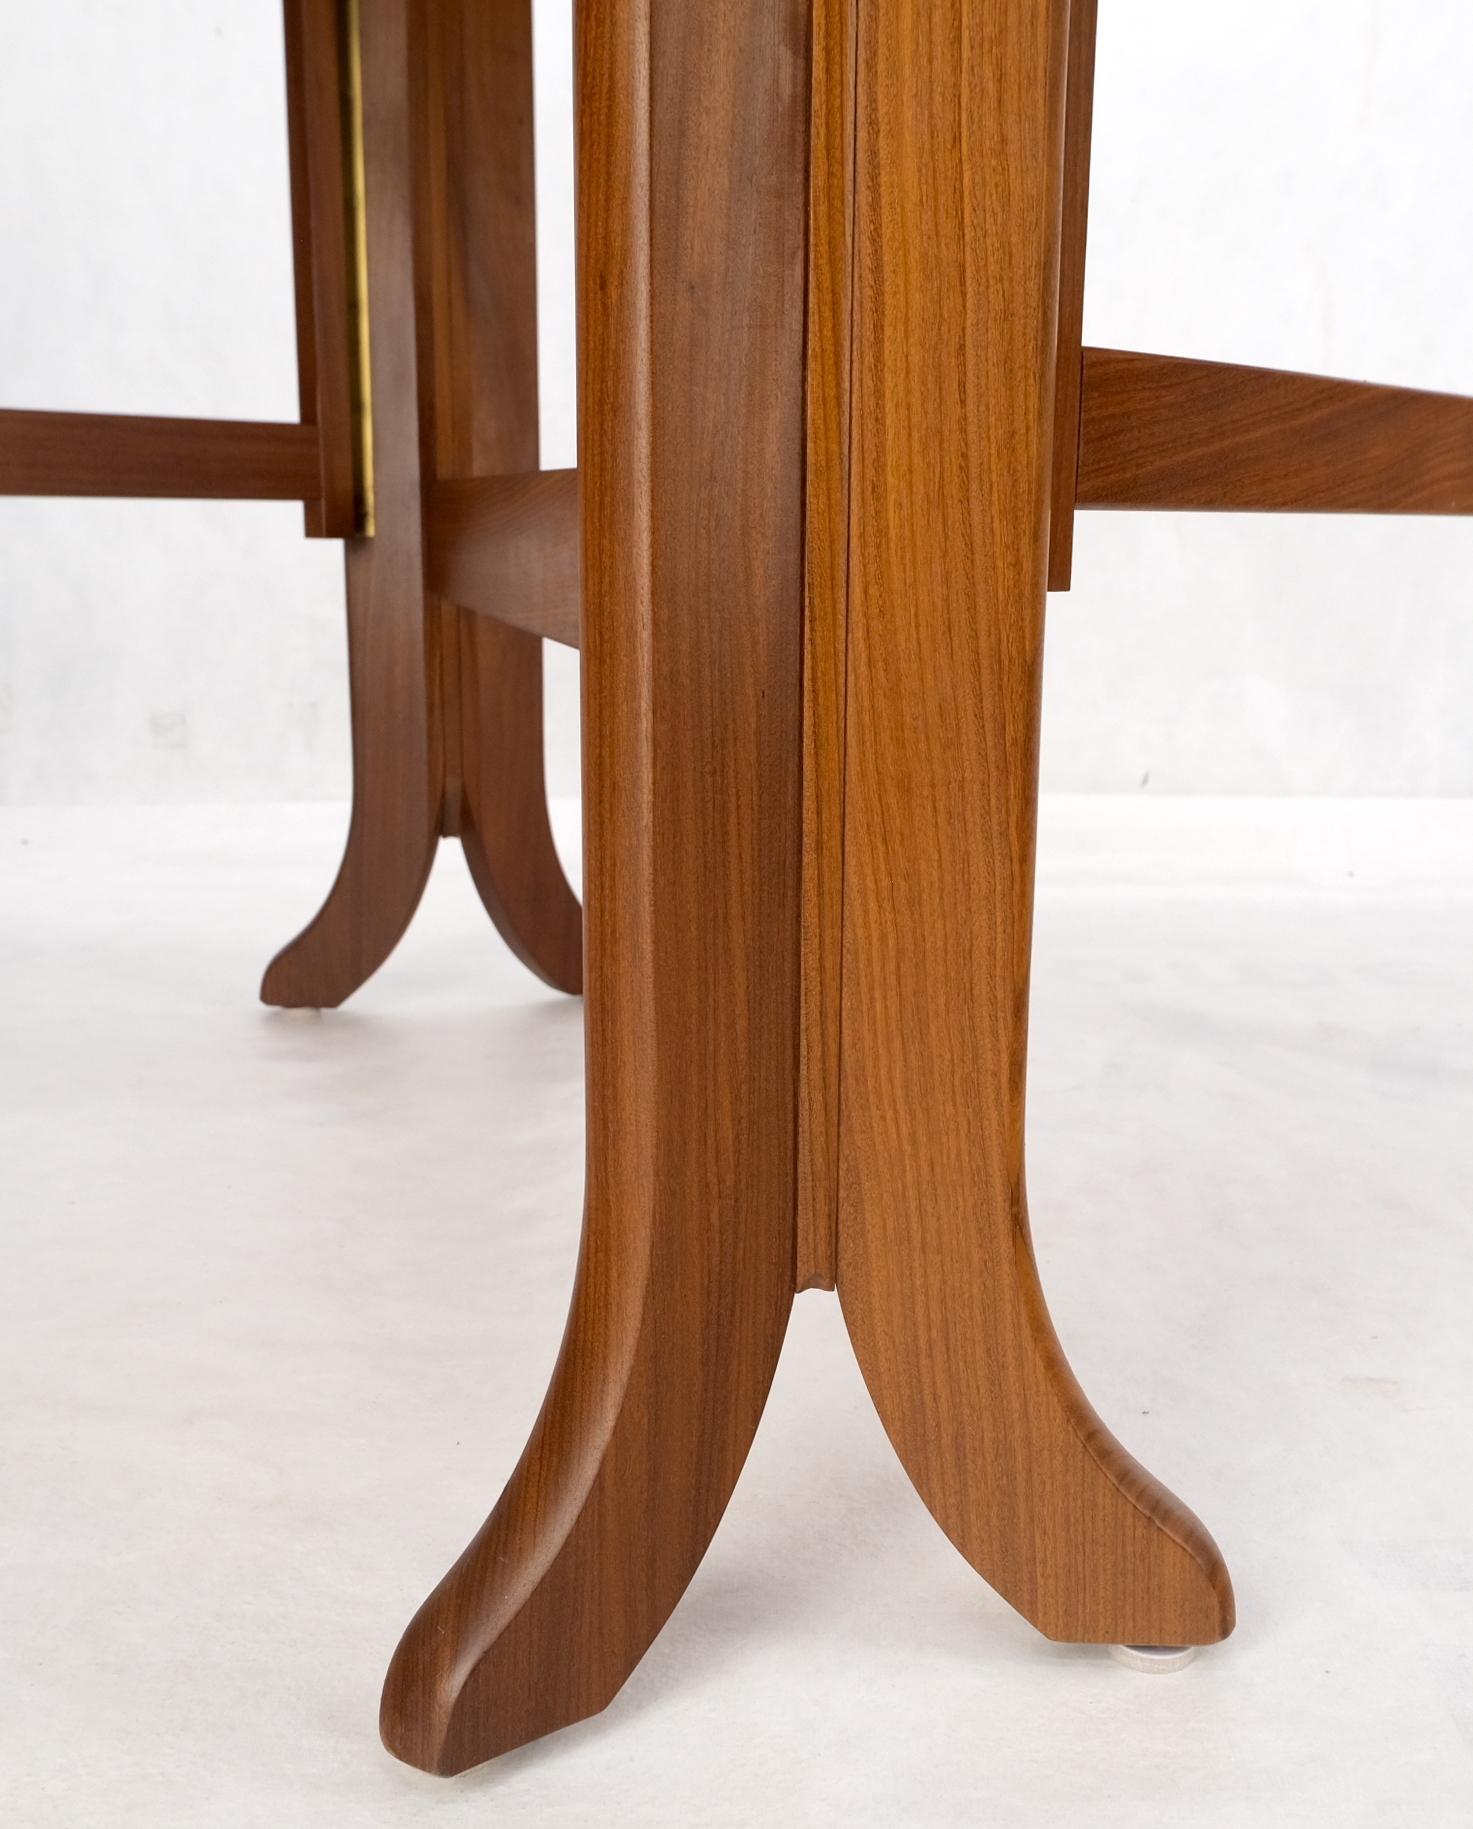 Lacquered Danish Teak Mid-Century Modern Drop Leaf Gate Leg Dining Table For Sale